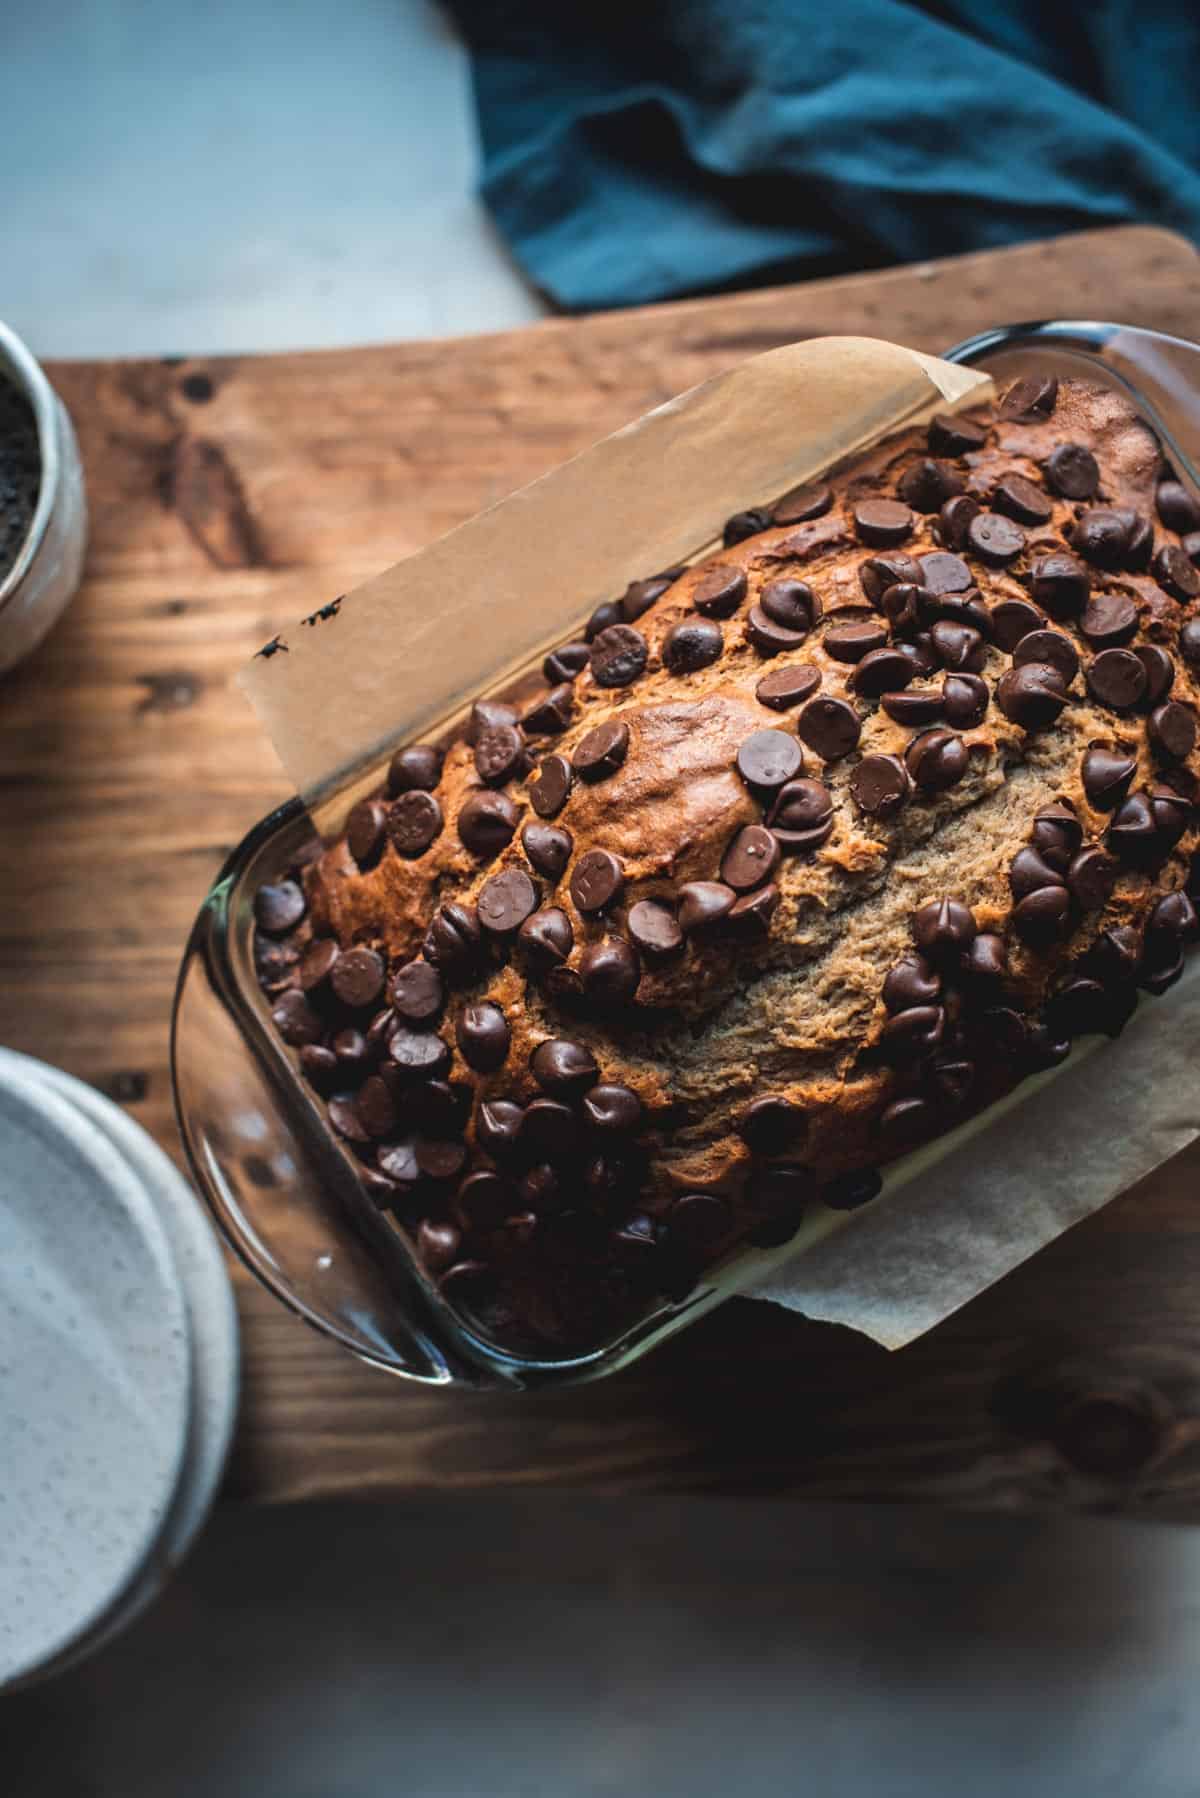 View from above. The glass loaf pan is placed onto a wooden chopping board. The Peanut butter banana bread has been baked and has risen in the dish, there are lots of chocolate chips on top and it is slightly cracked along the middle.